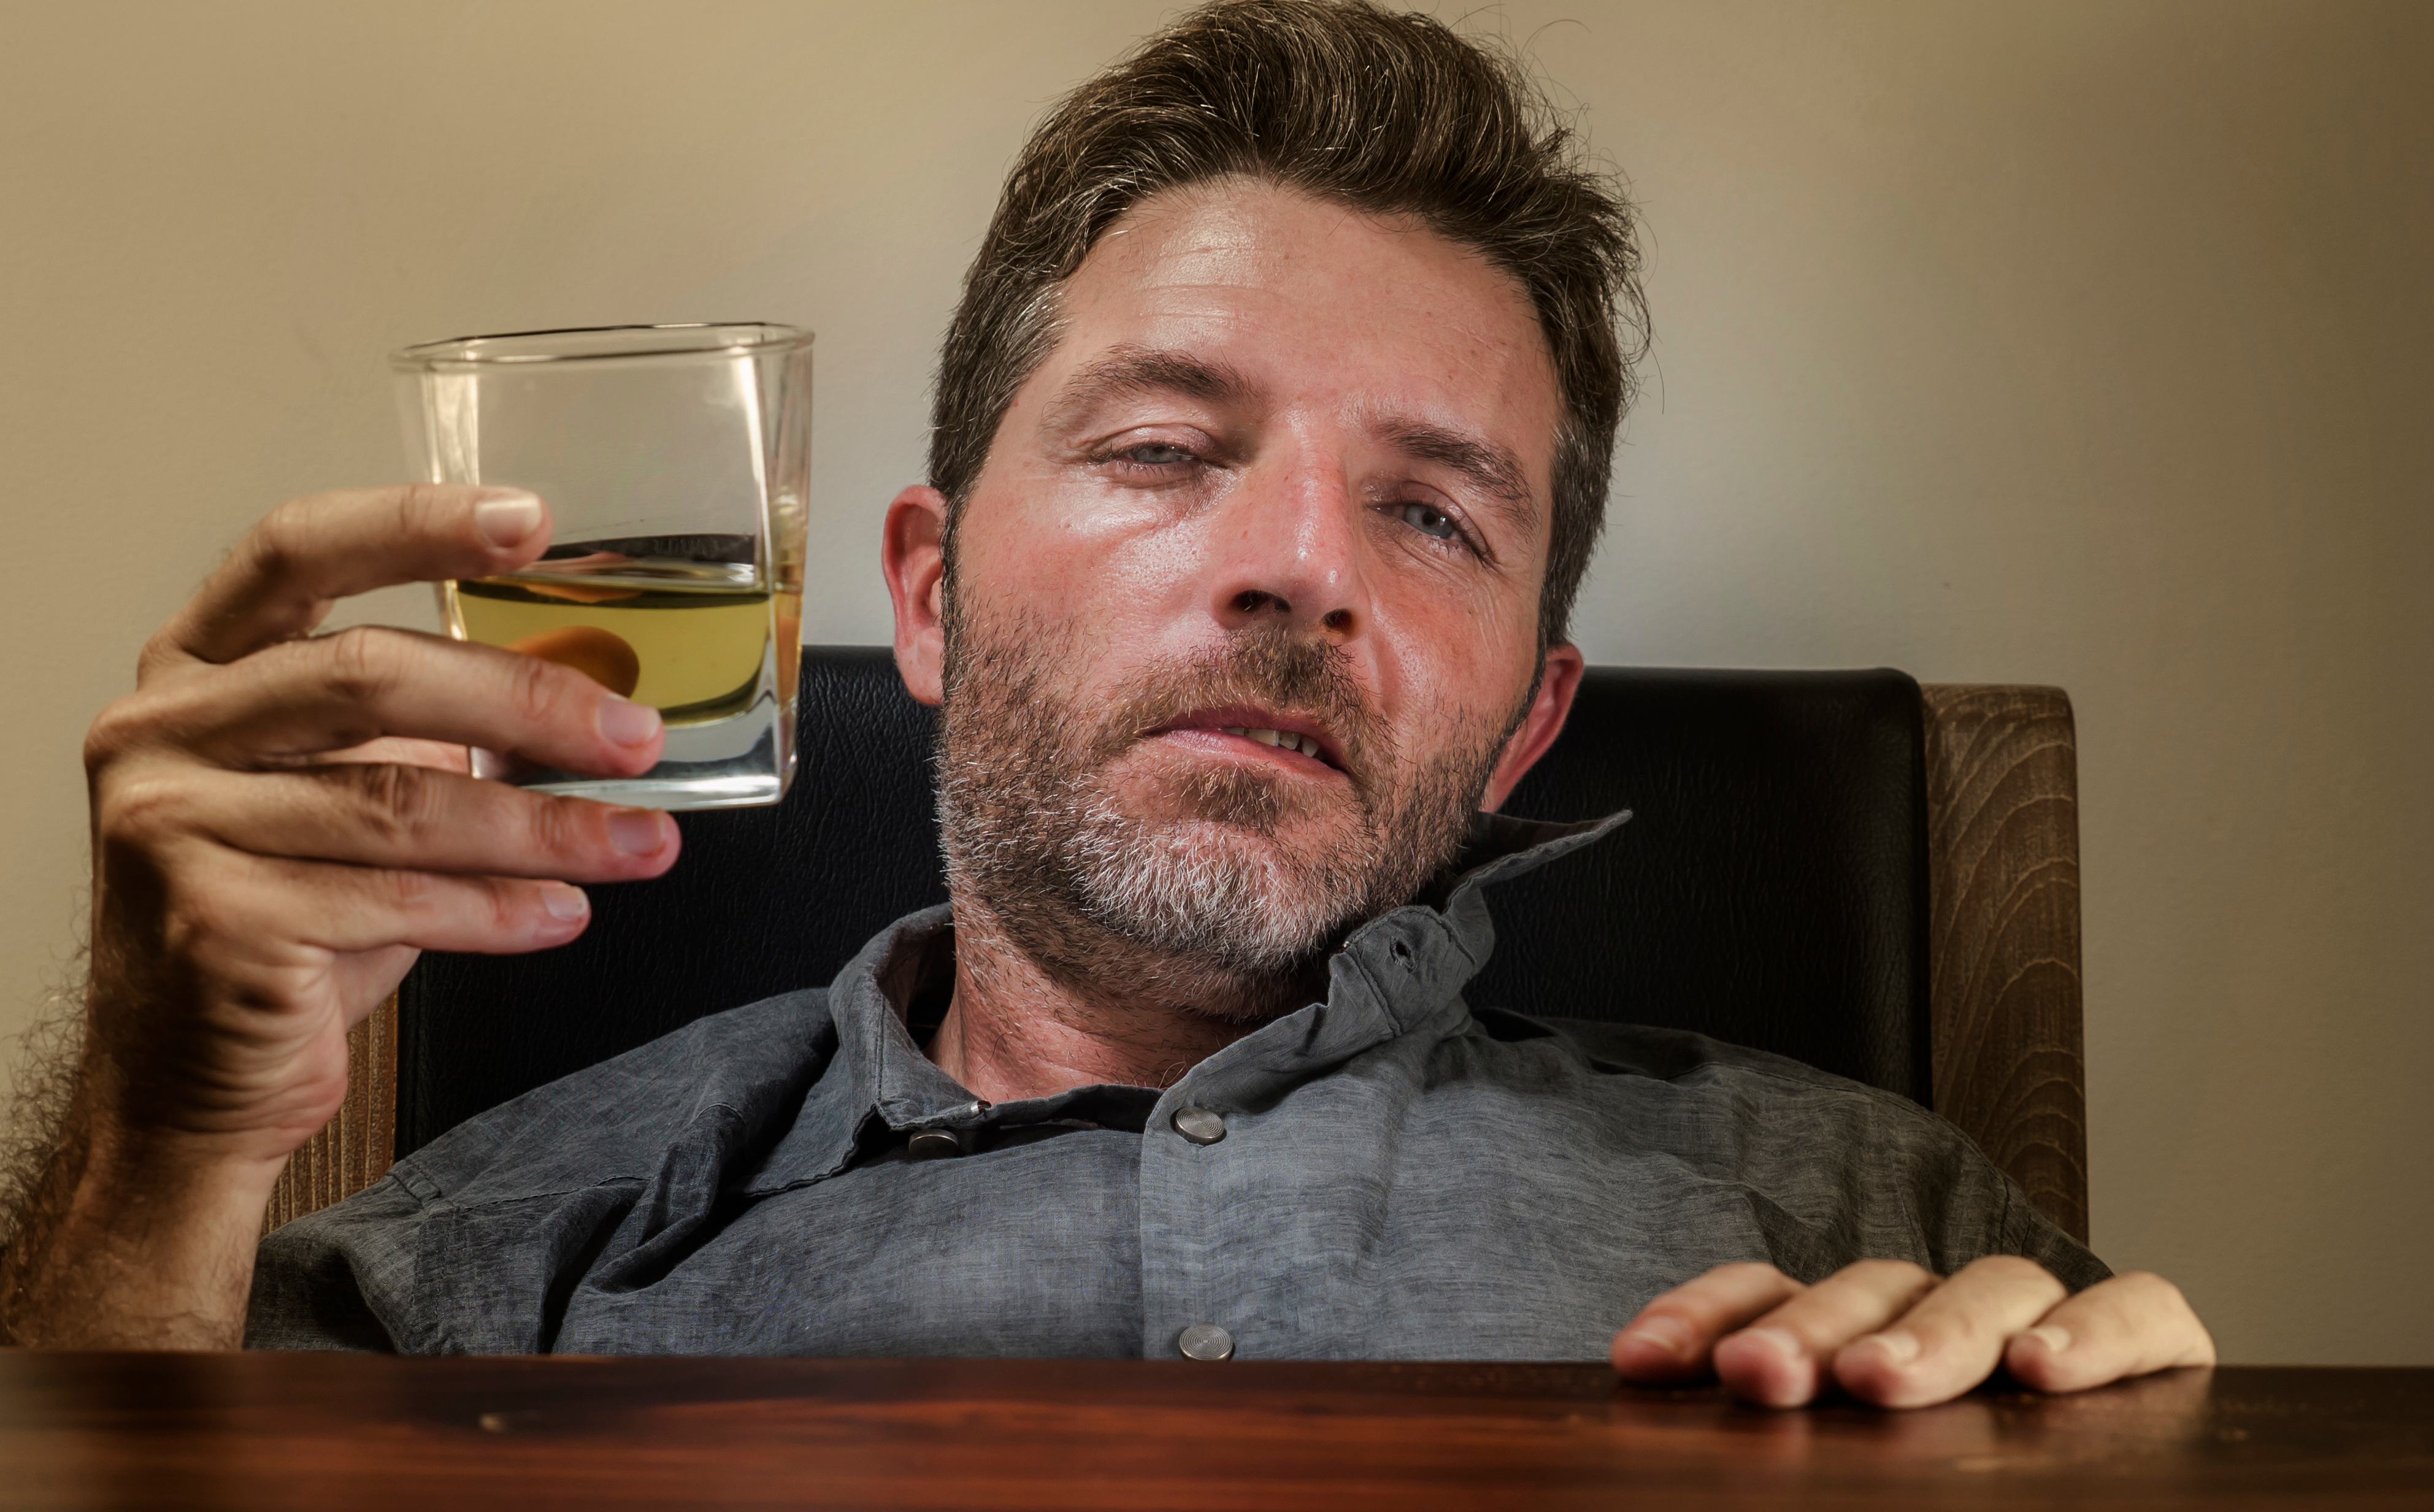 Drunk man with alcohol | Shutterstock